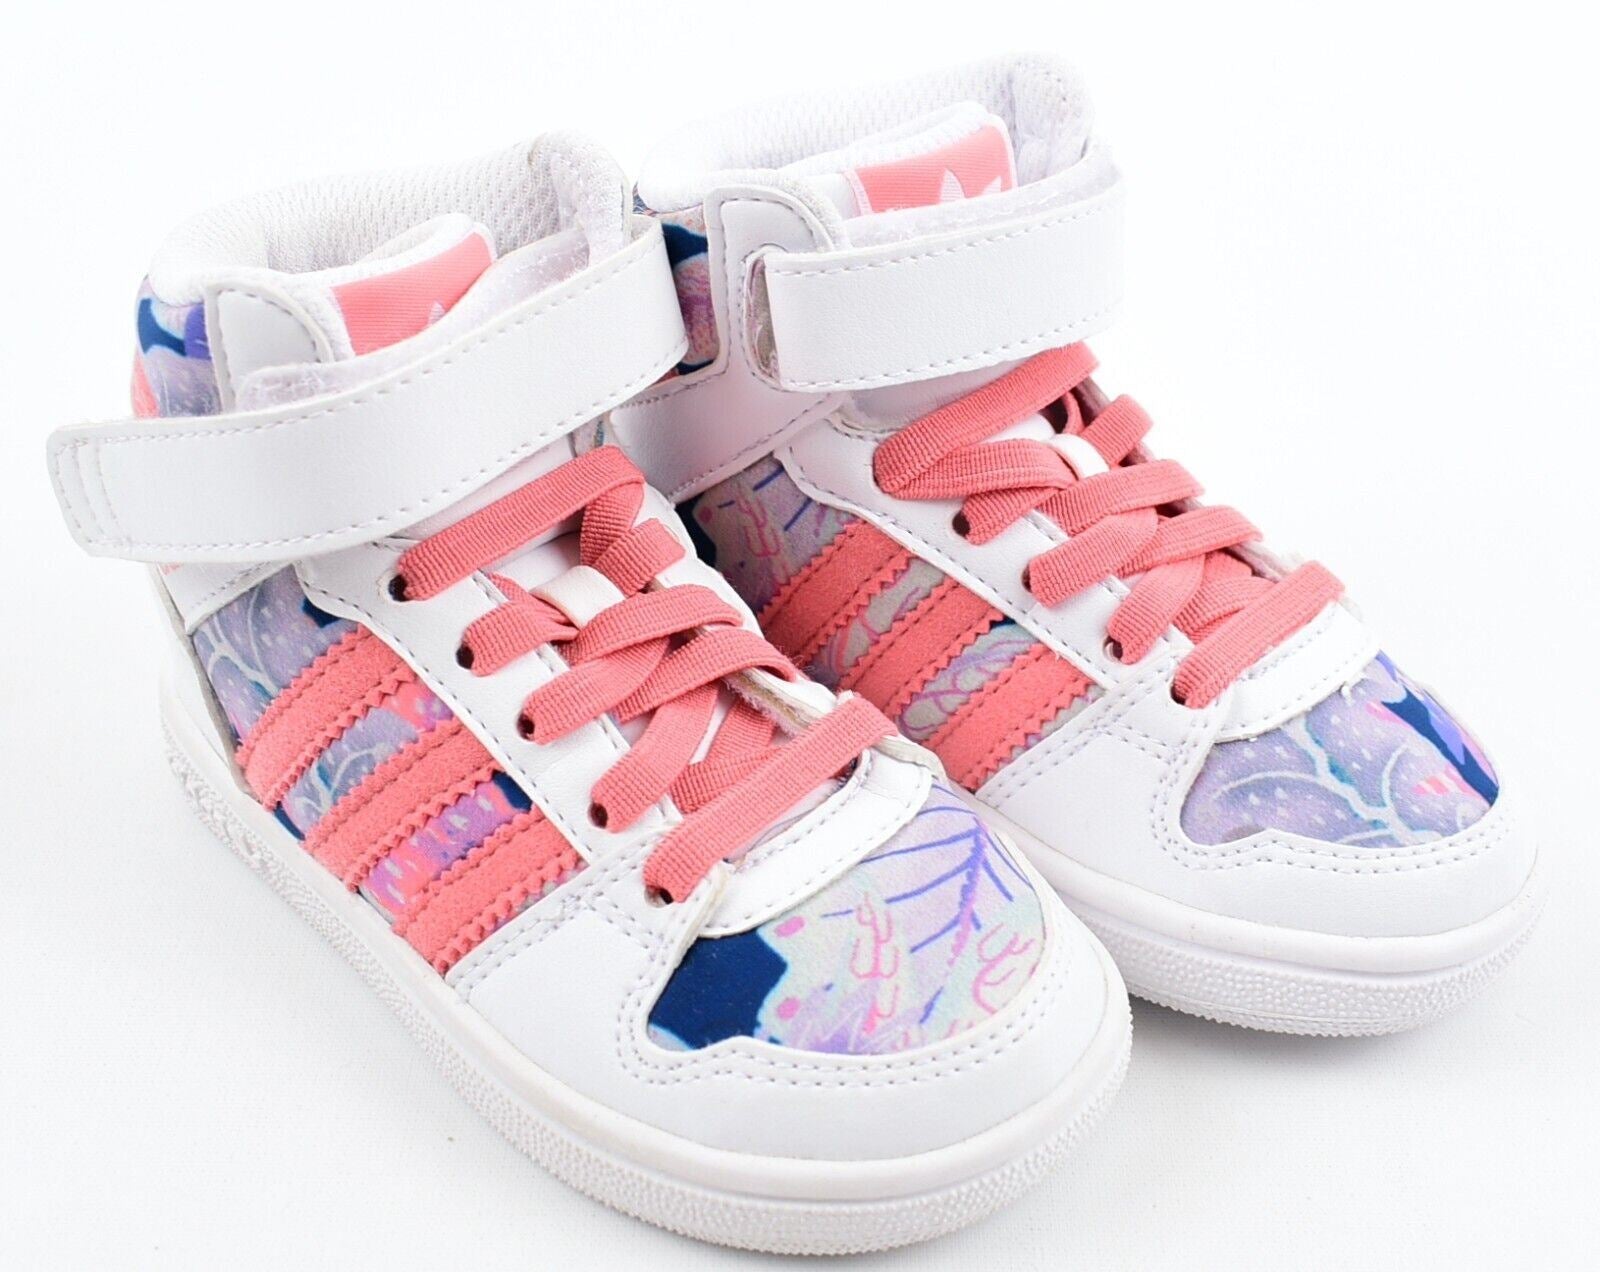 ADIDAS Girls' PROP PLAY 2 High Top Trainers, White-Pink, size infant UK 5 /EU 21